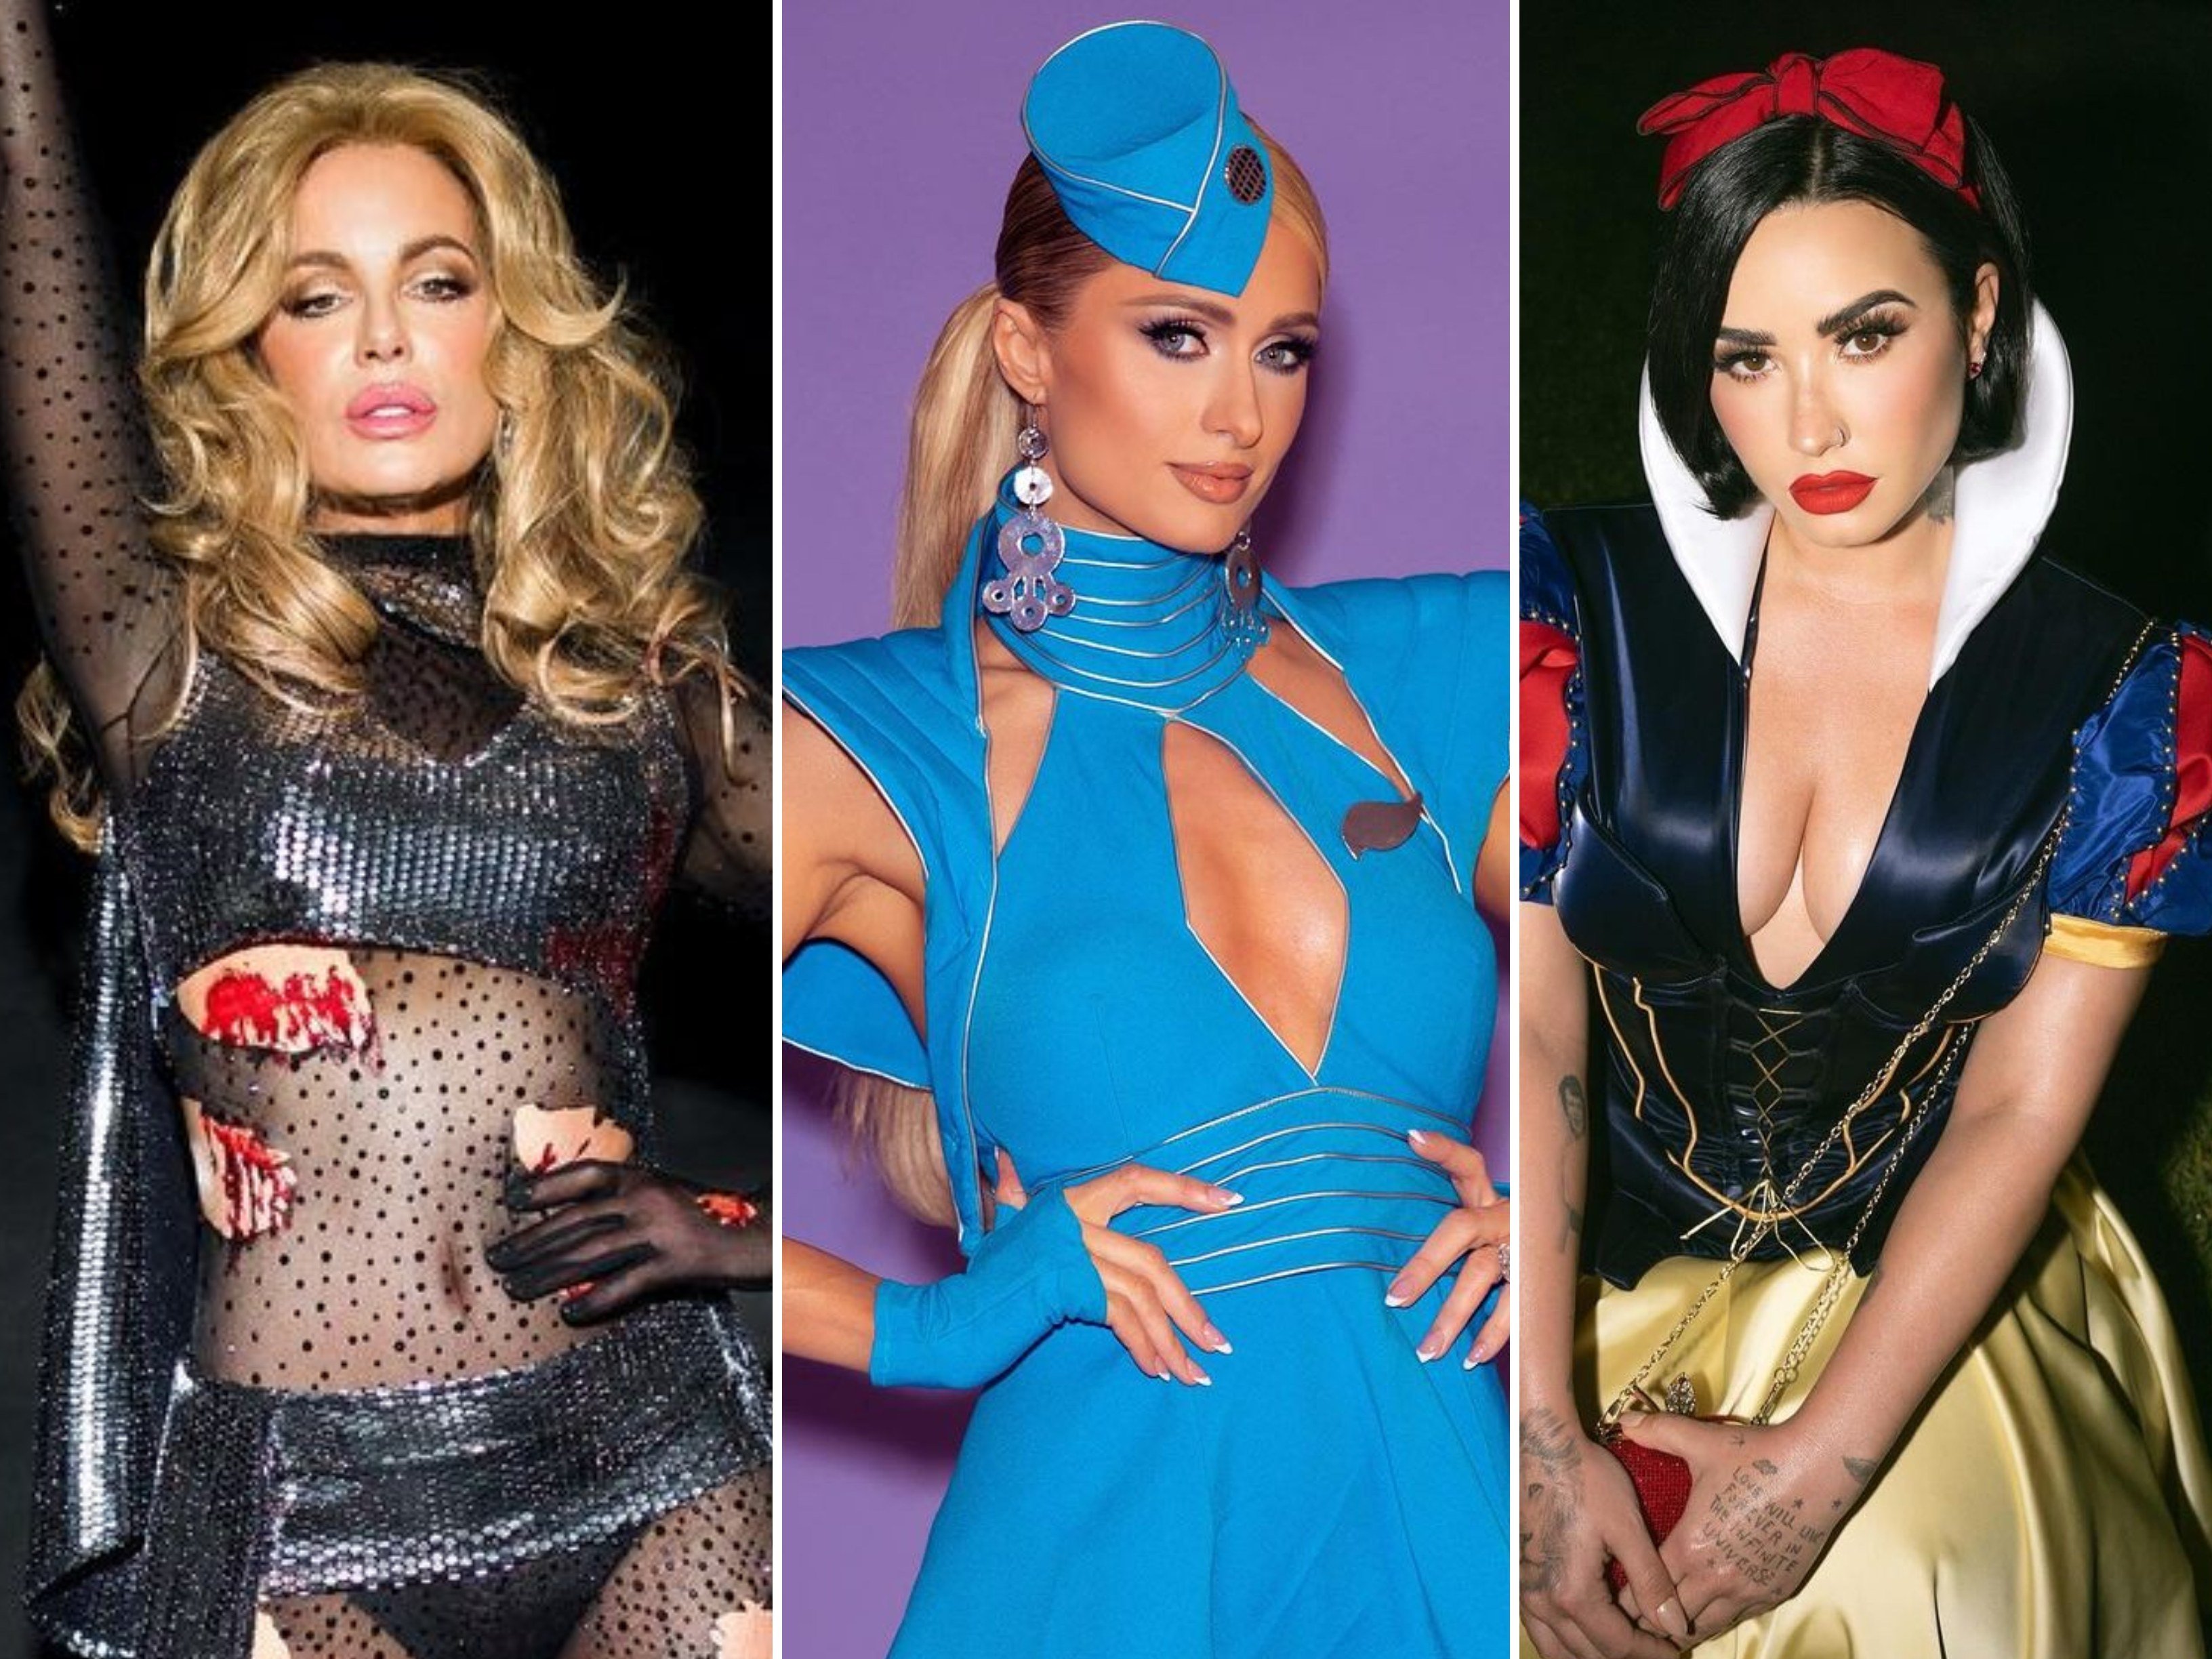 Celebs Kate Beckinsale, Paris Hilton and Demi Lovato wearing titillating costumes for Halloween in 2023. Photos: @katebeckinsale, @parishilton, @ddlovato/Instagram